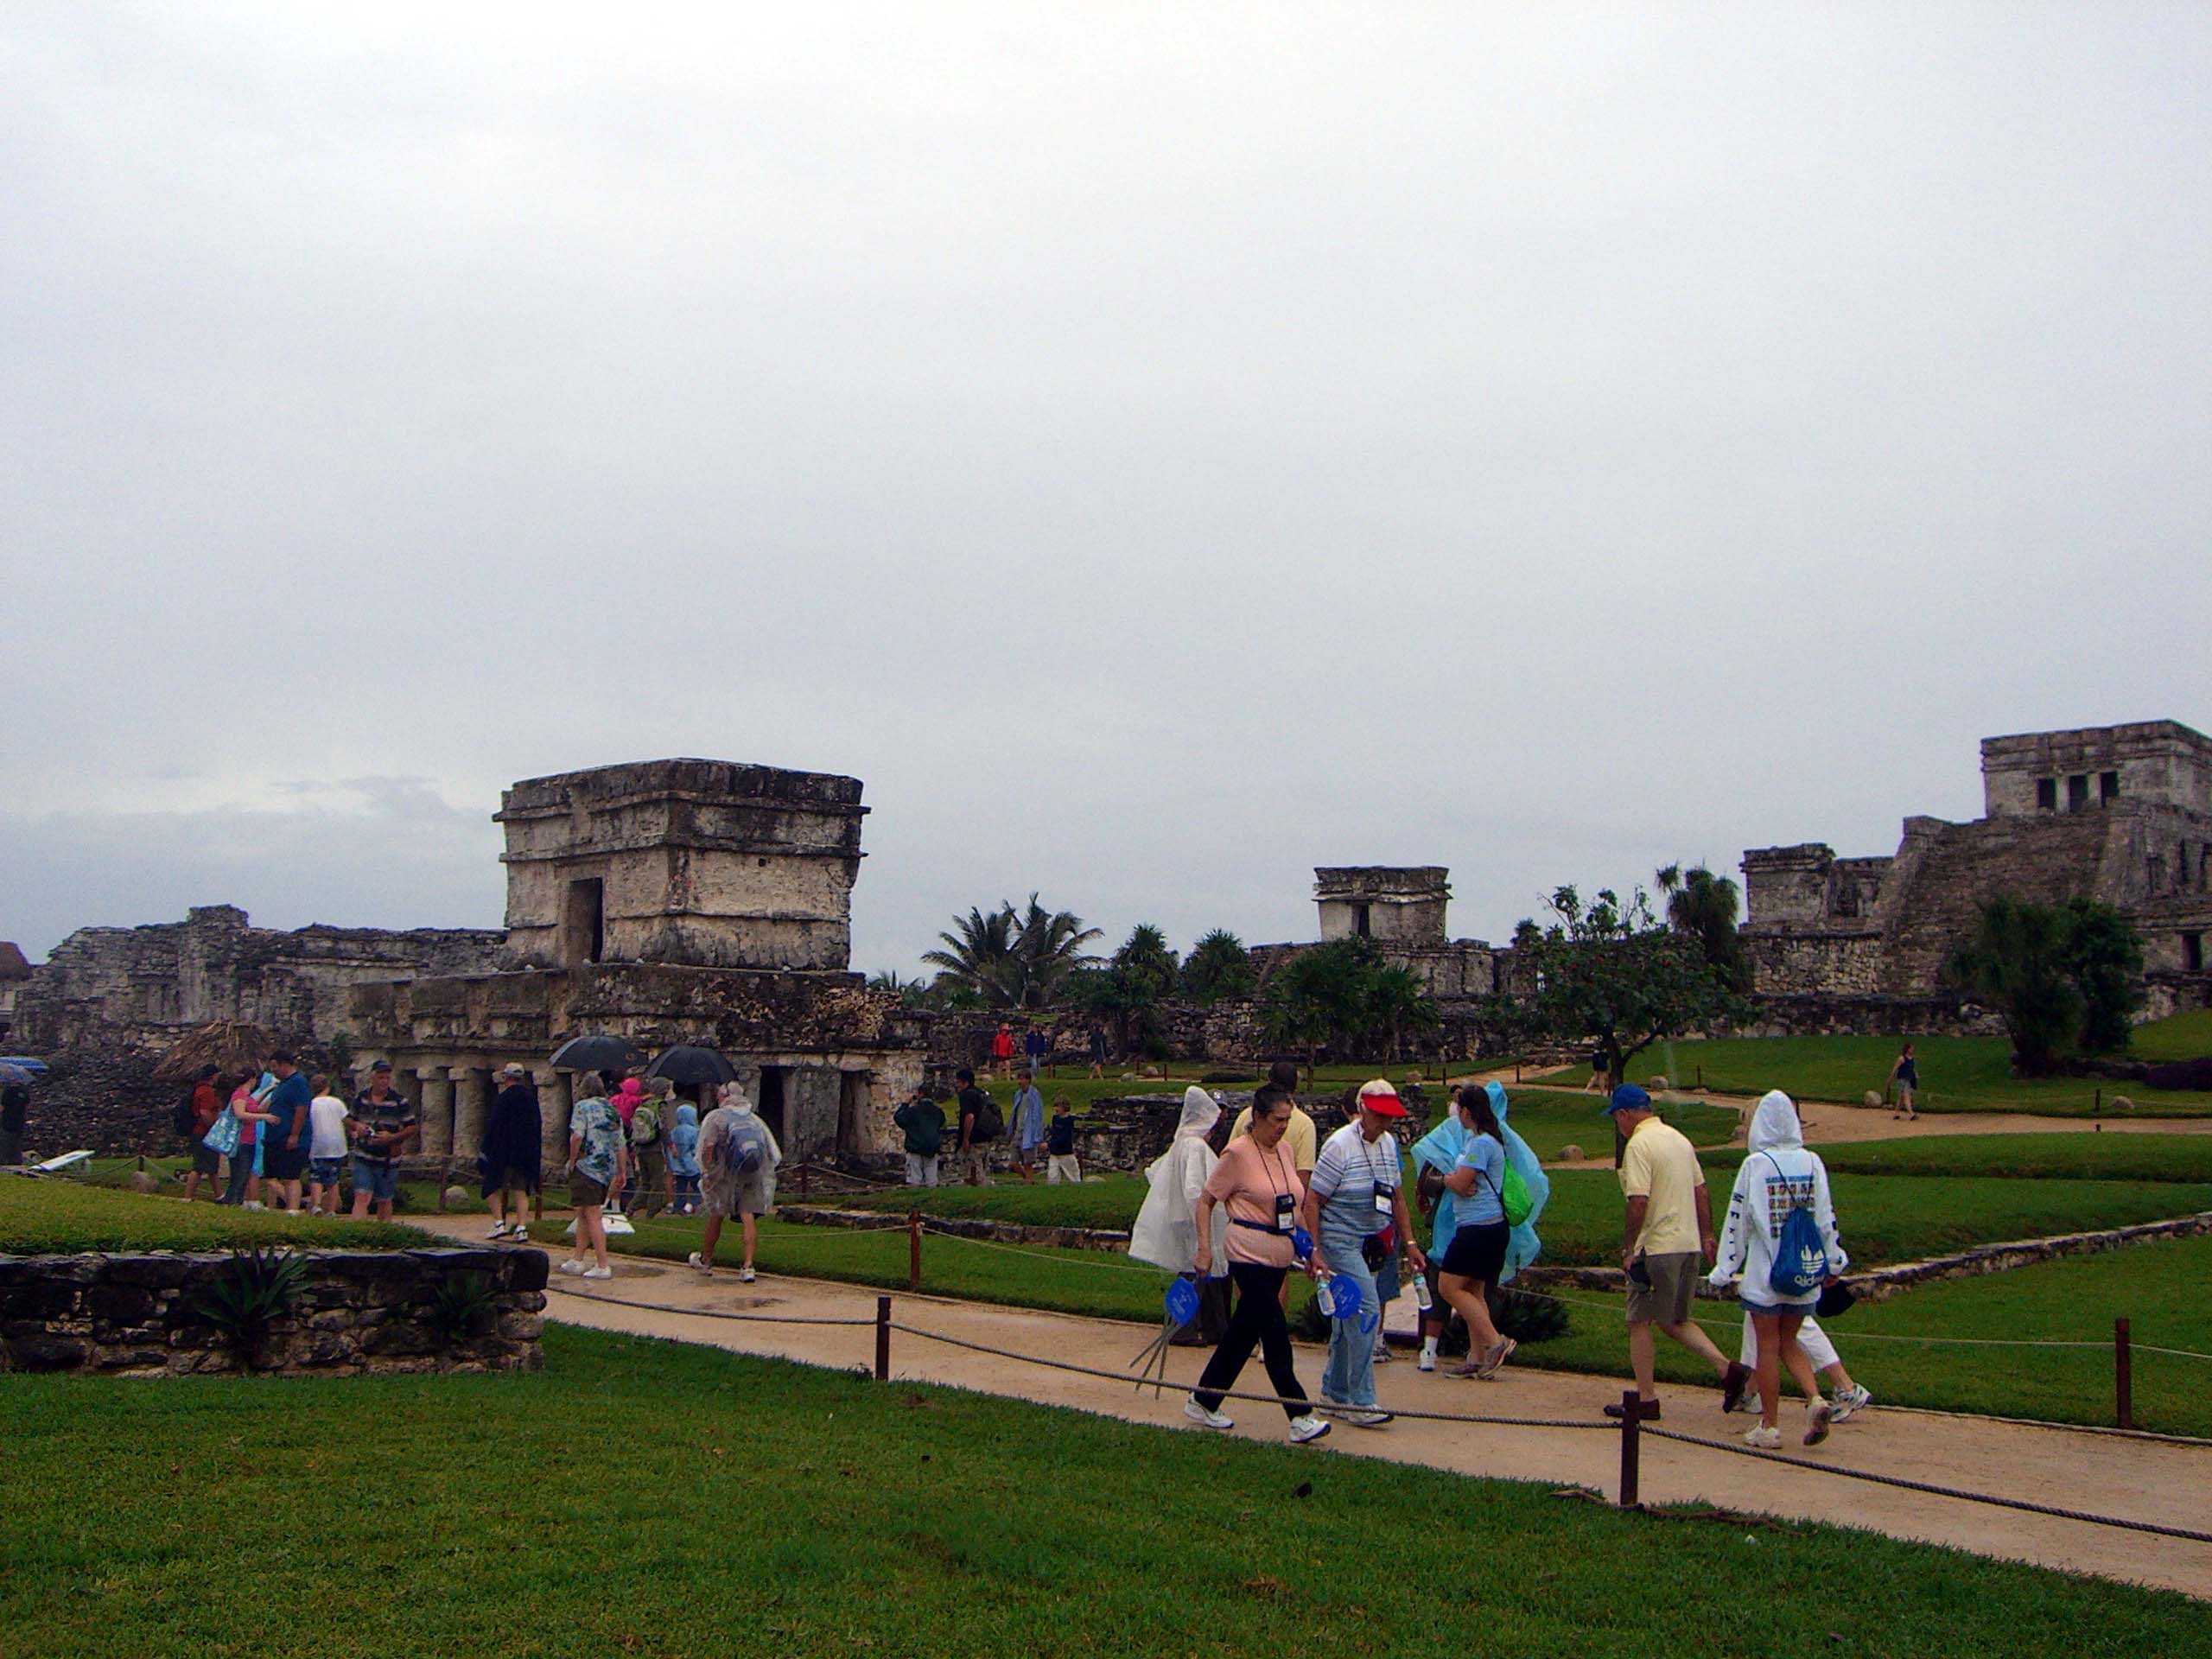 The "Castle" (far right) and other ruins of Tulum